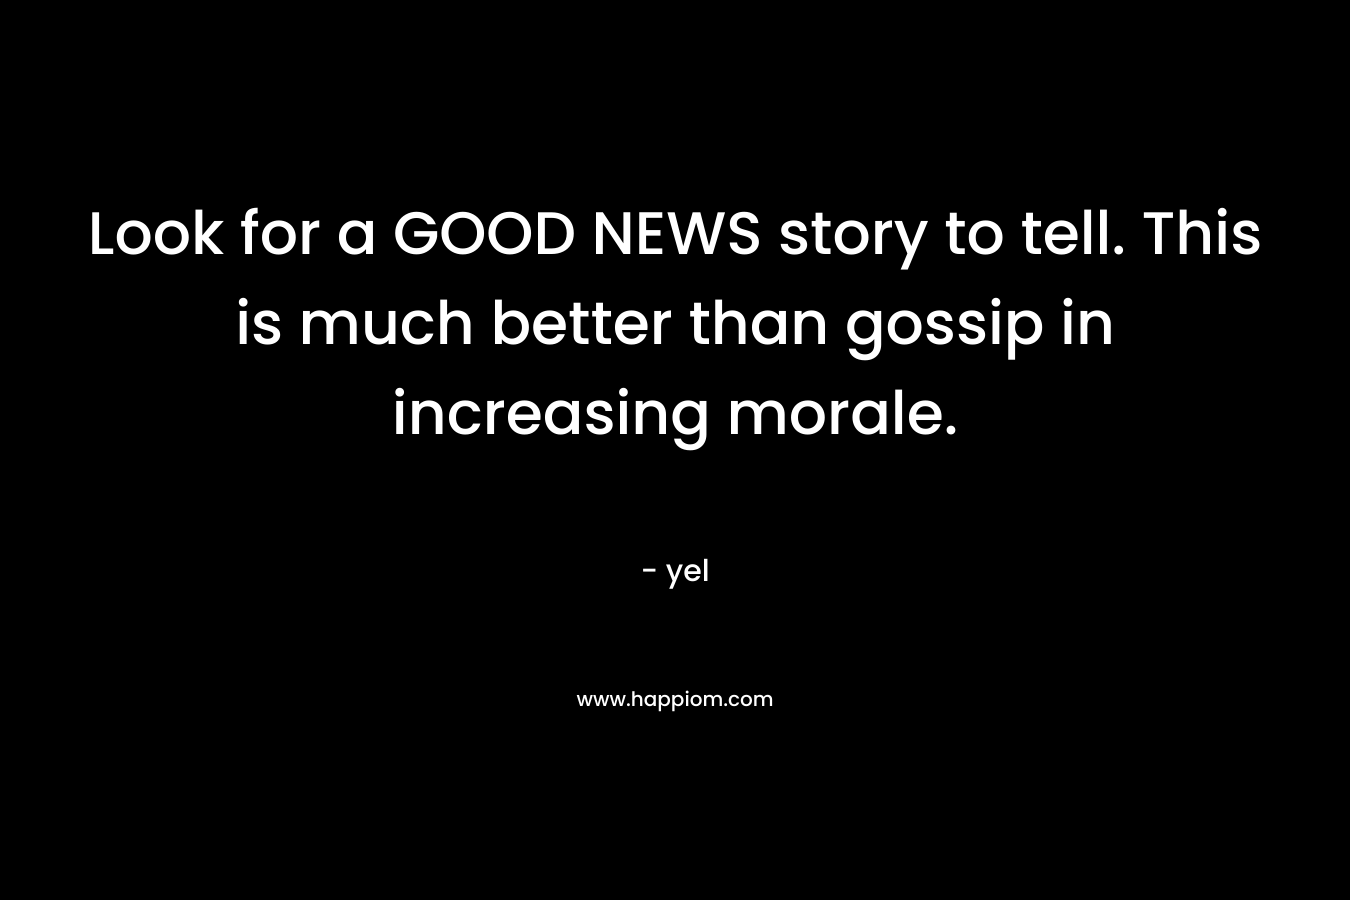 Look for a GOOD NEWS story to tell. This is much better than gossip in increasing morale. – yel